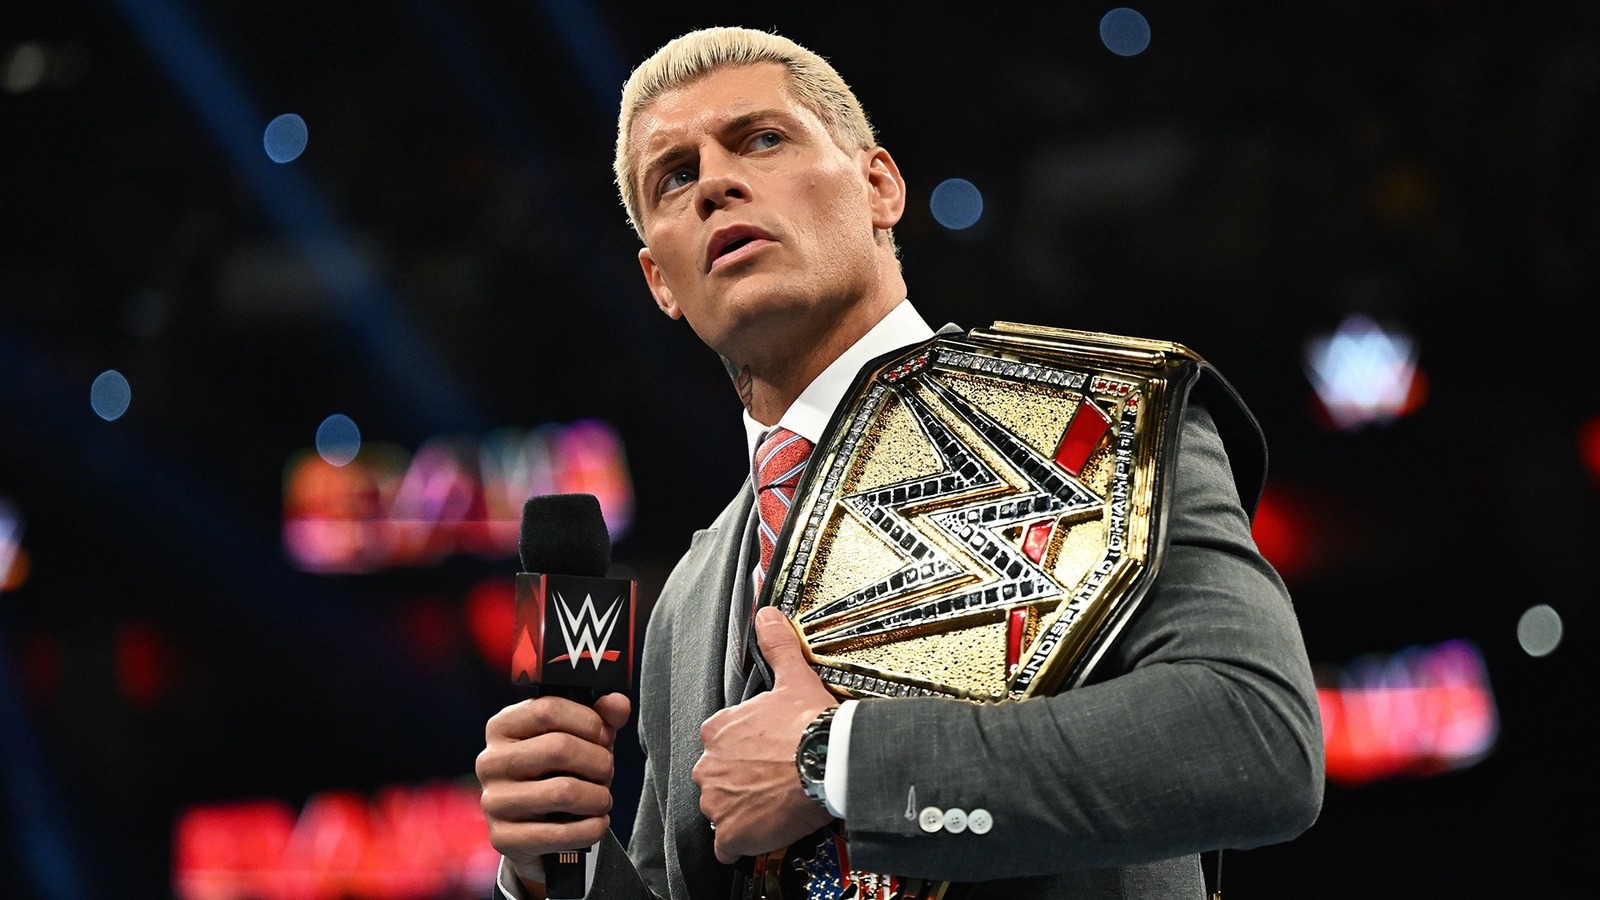 Bully Ray Fantasy Books Storyline With WWE Champ Cody Rhodes & Current AEW Star